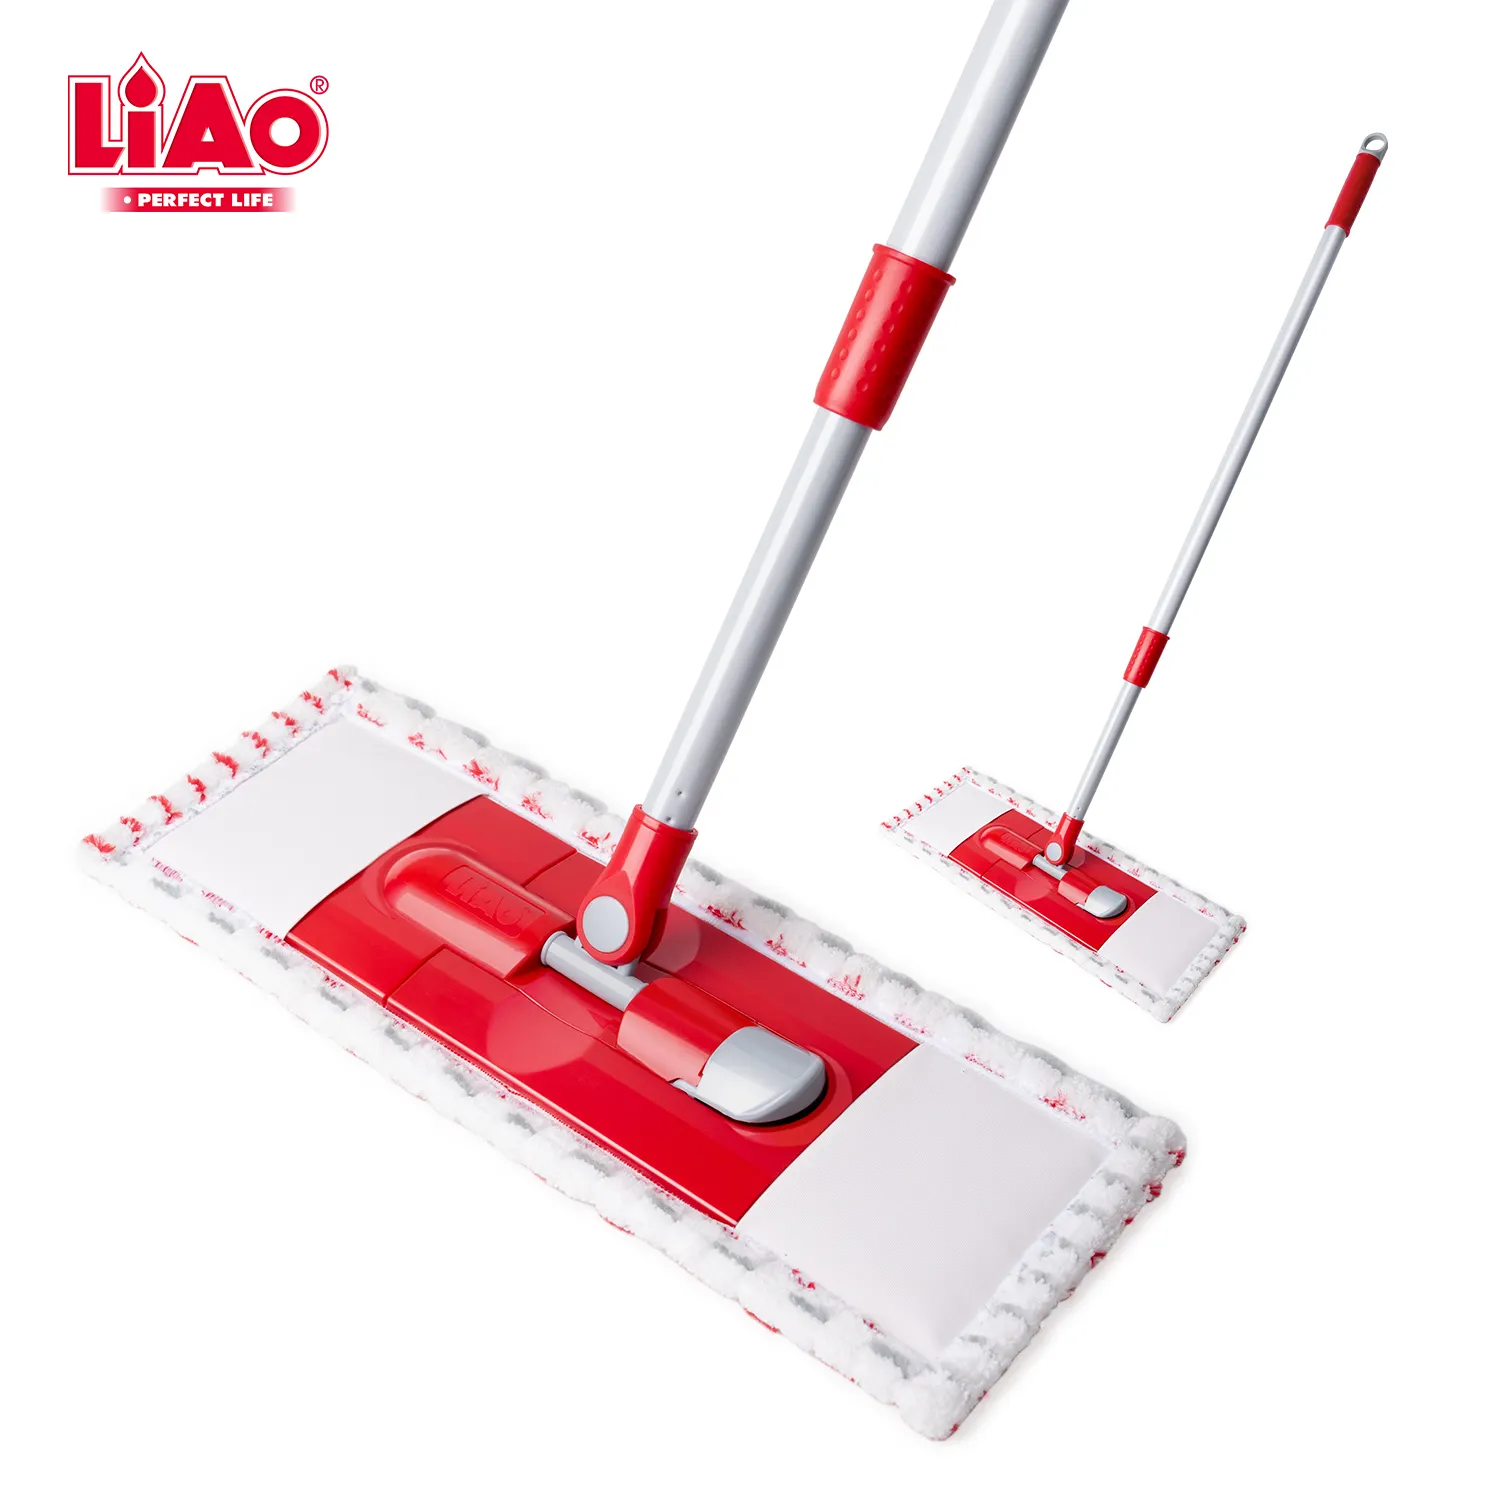 LiAo high quality microfiber flat mop with telescopic metal pole and wide size mop head